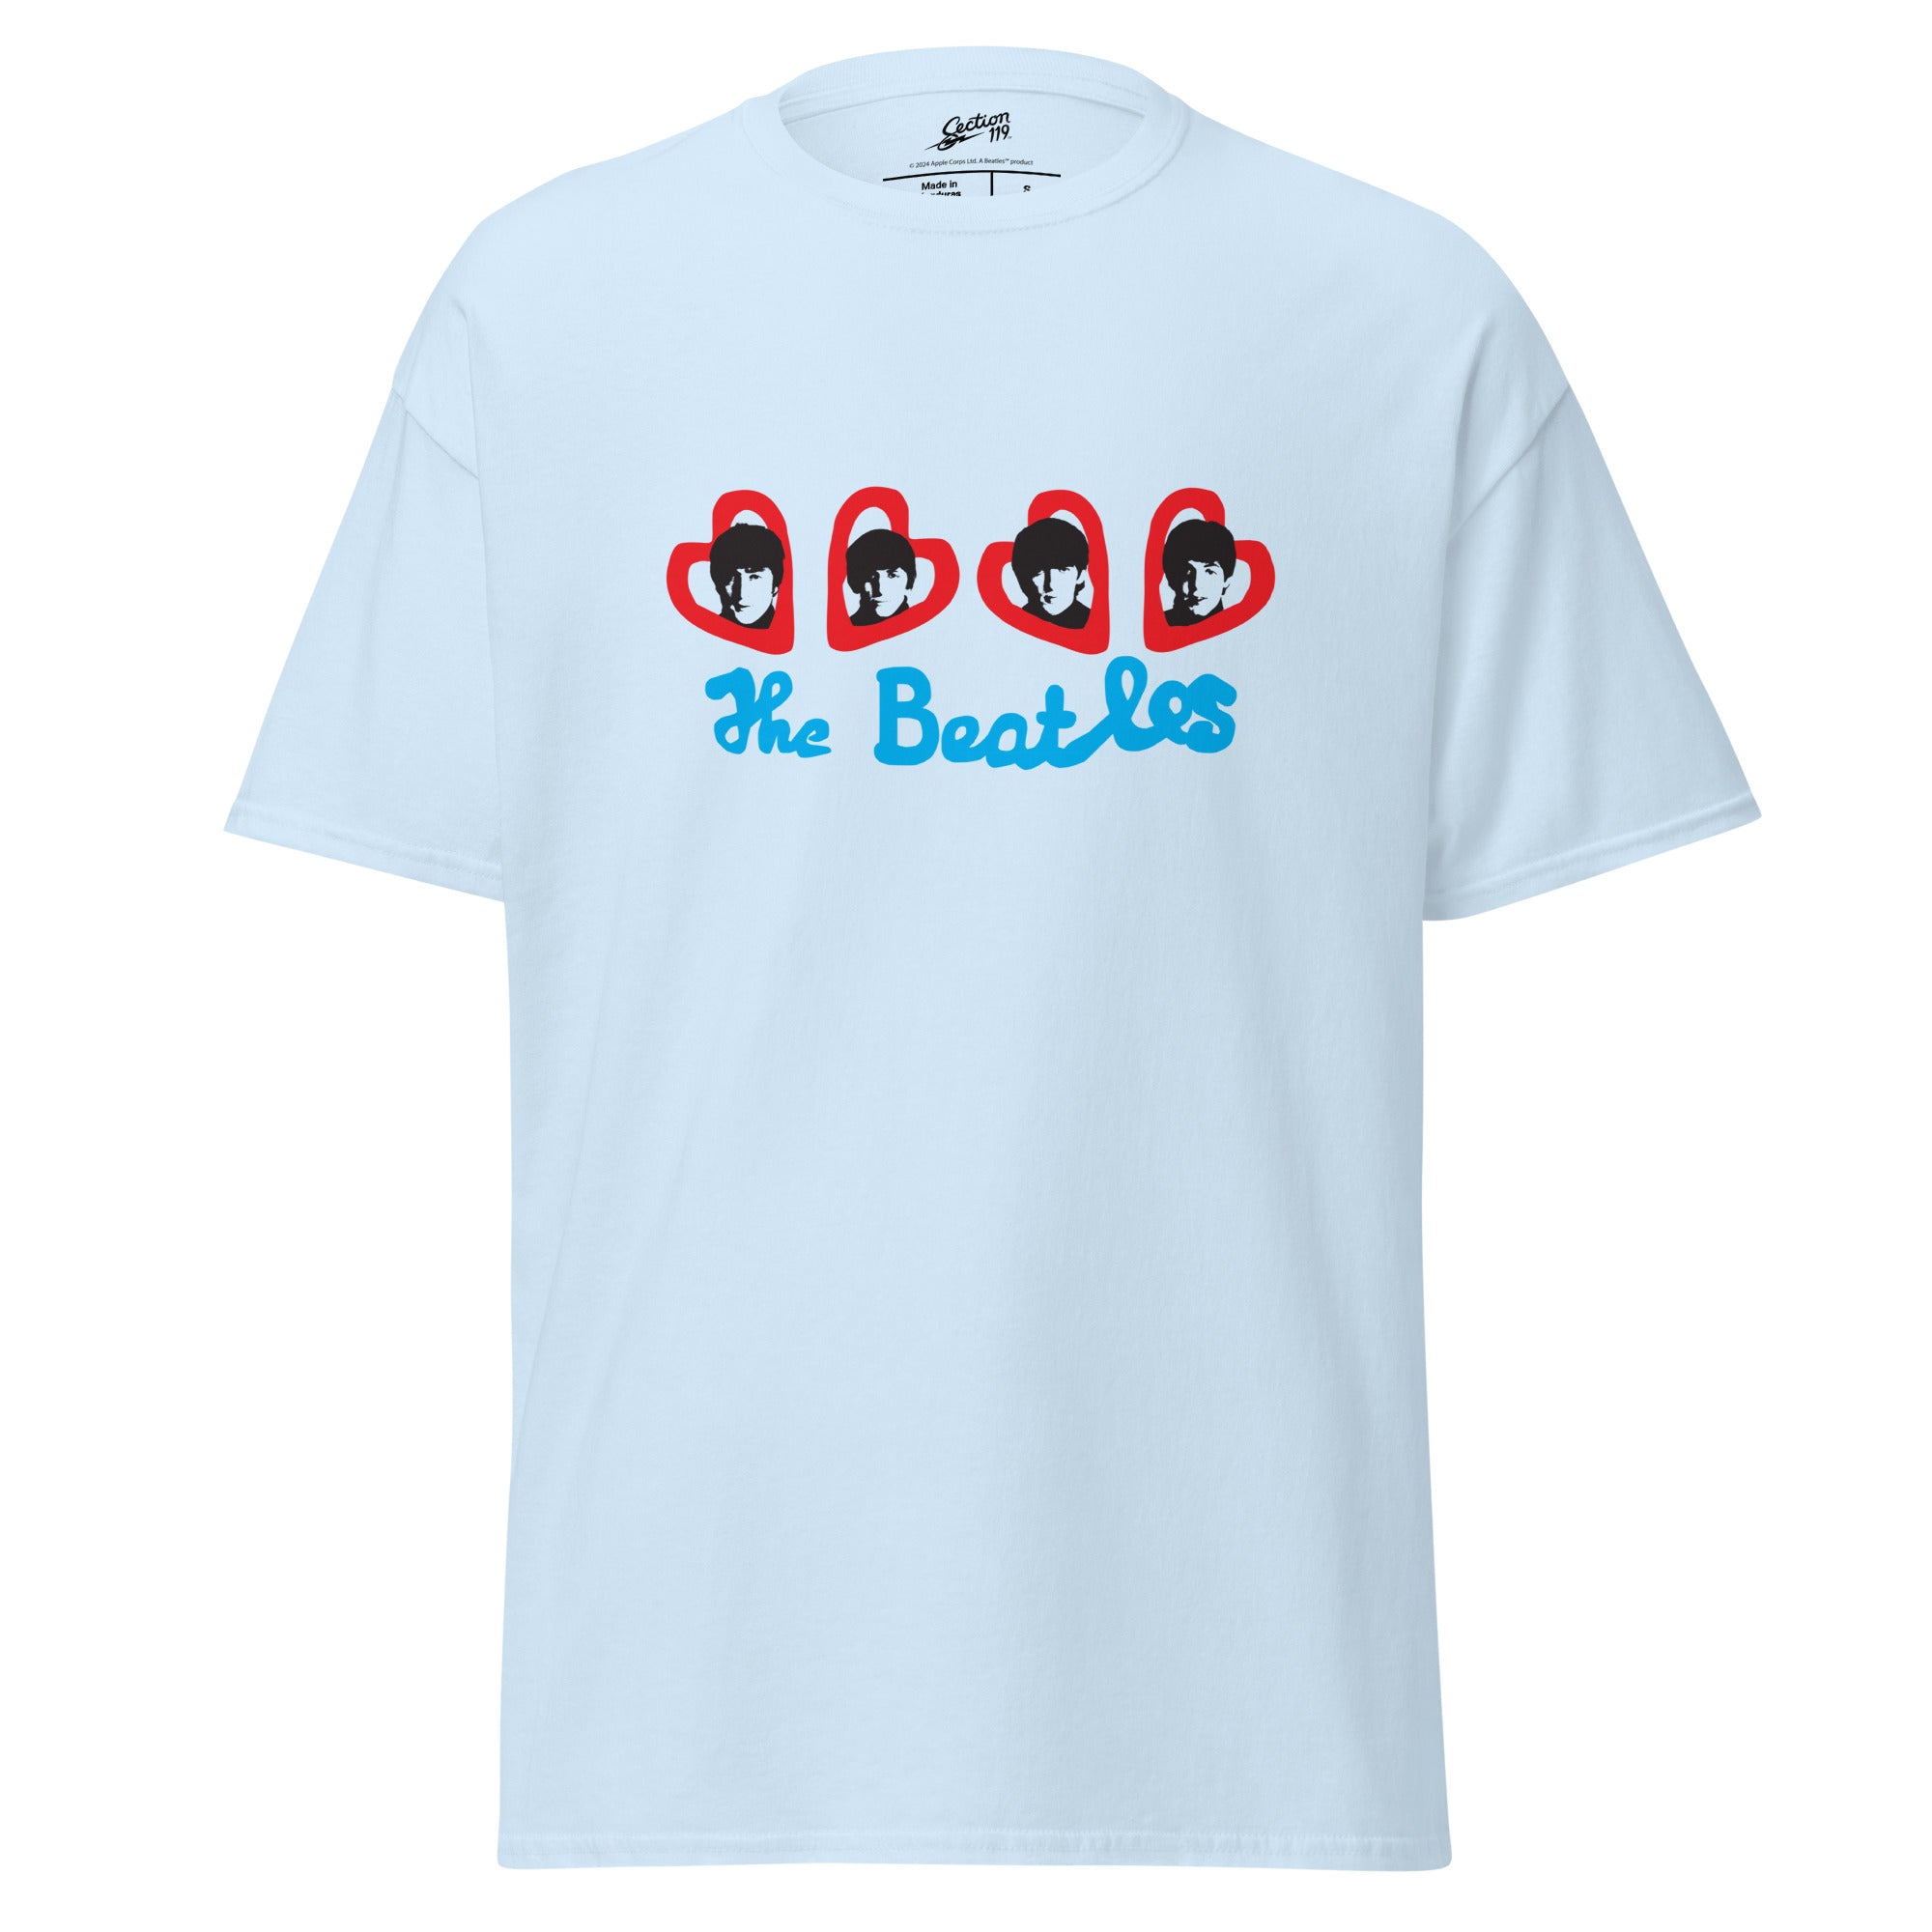 The Beatles Eco T-Shirt Love Logo in Light Blue - Section 119